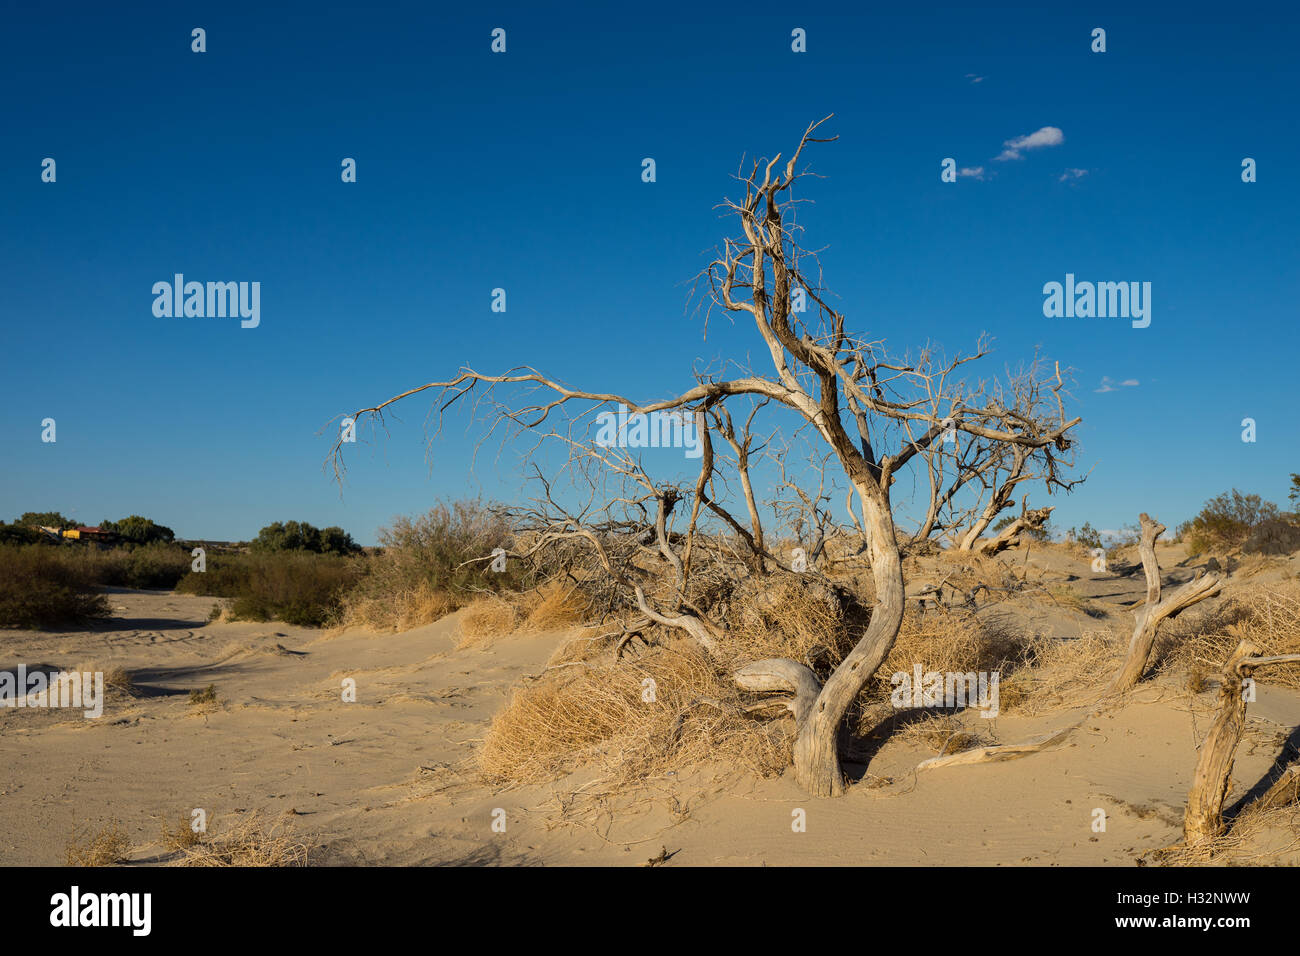 Twisted trunk of old dead desert tree burns in the sun. Stock Photo